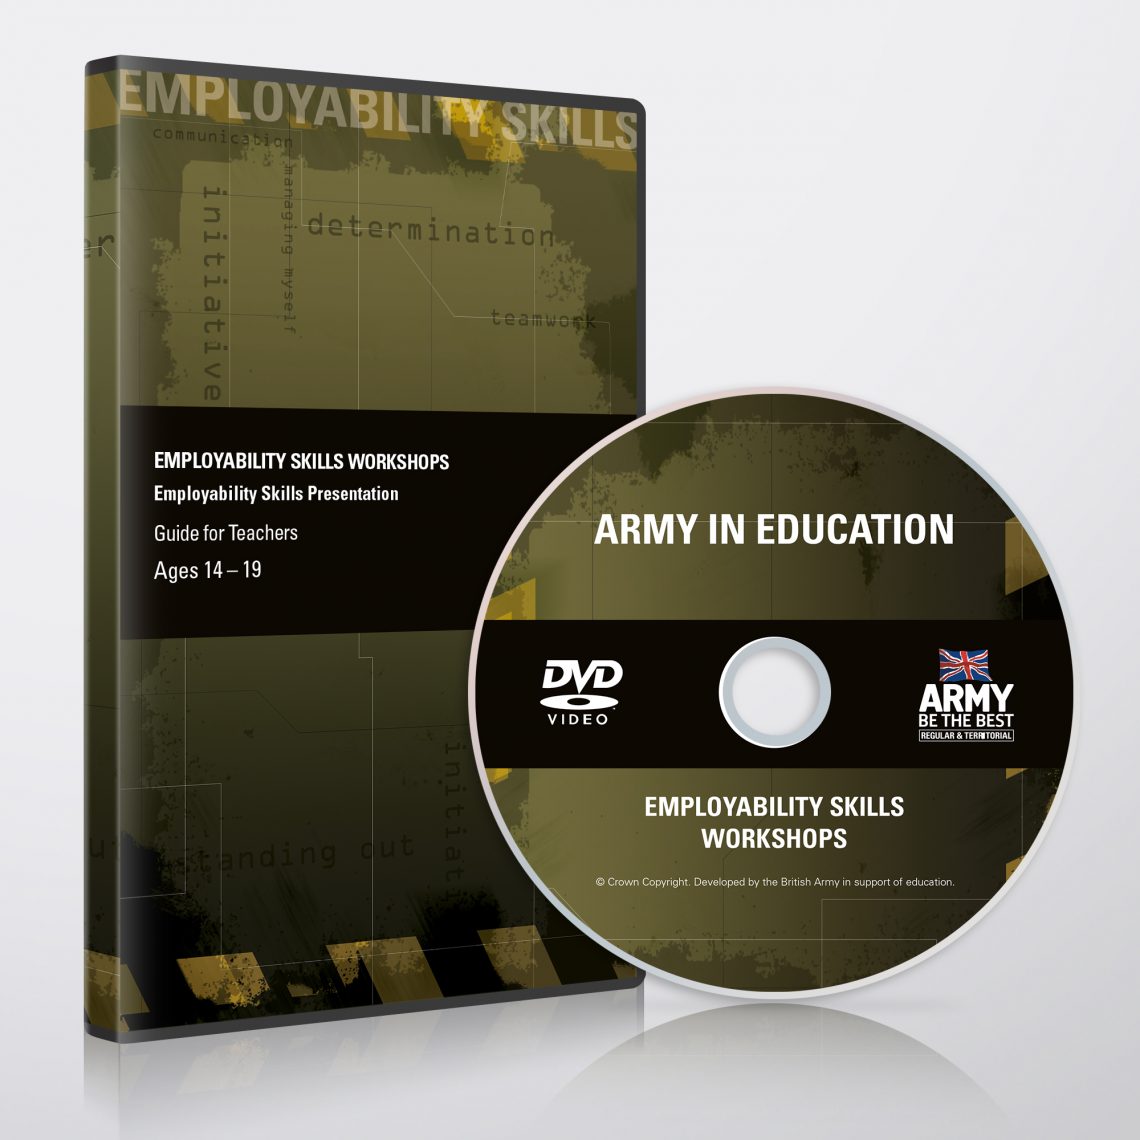 Army DVD Cover Design